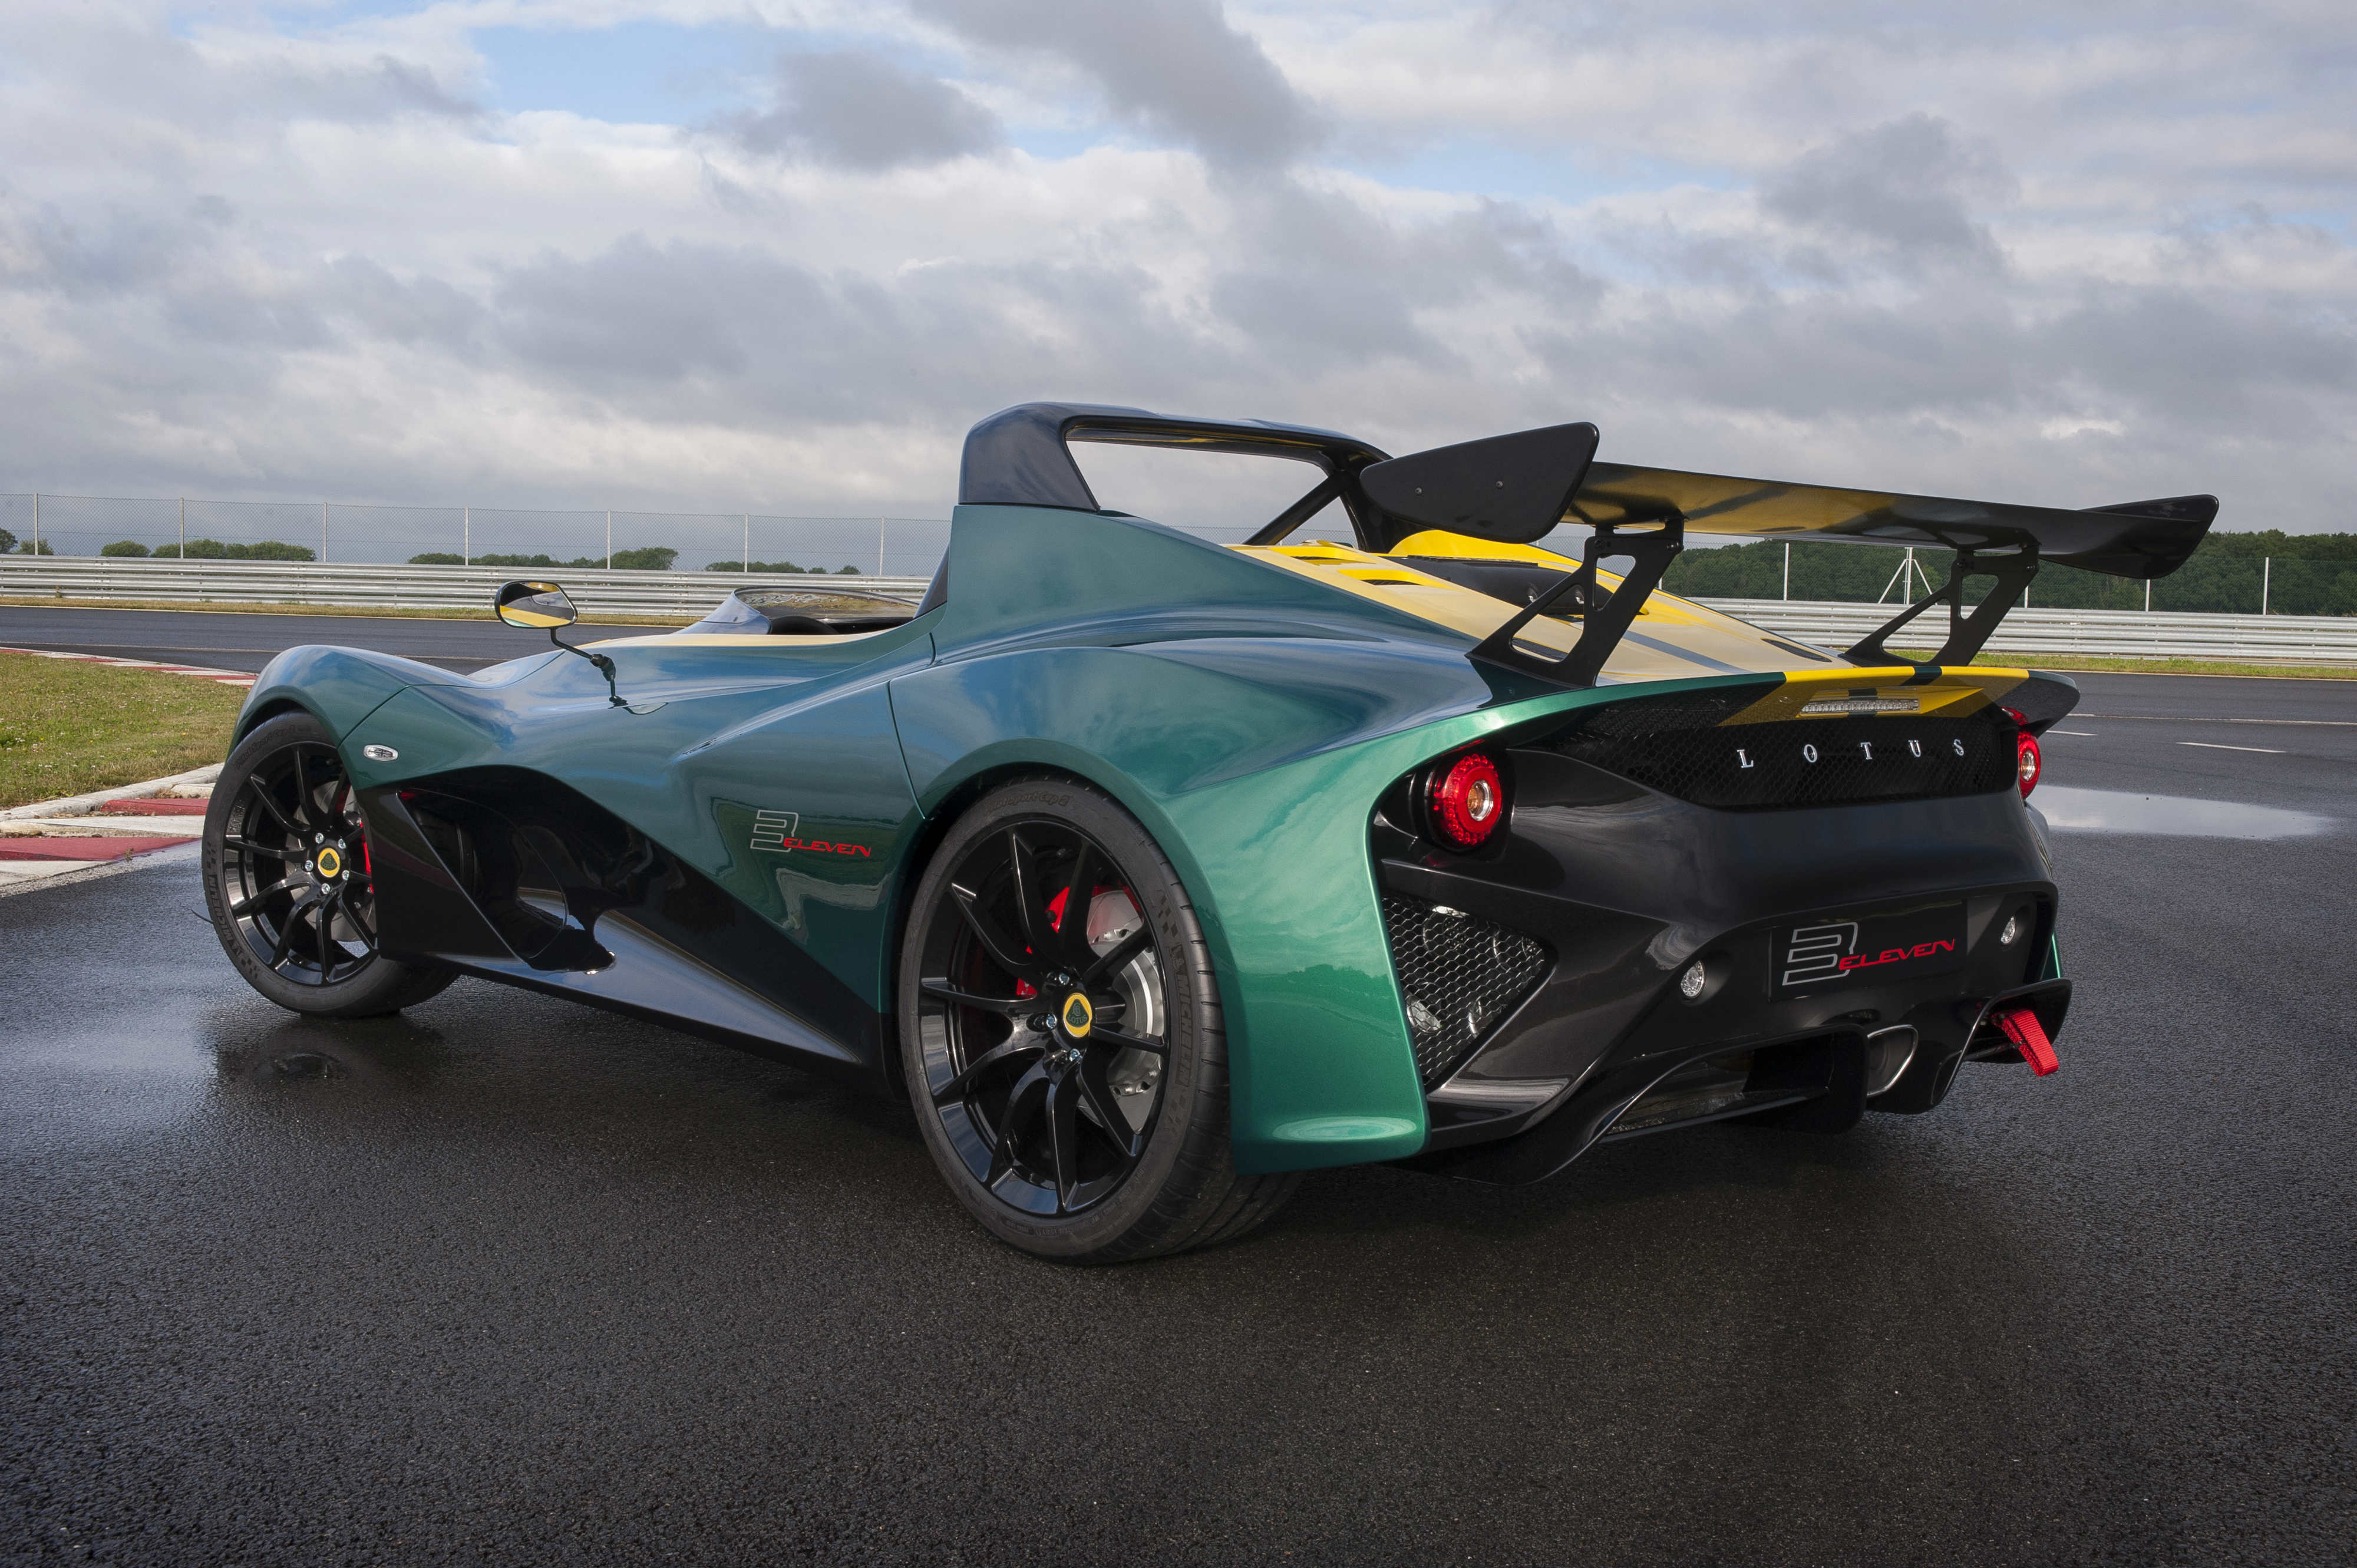 Lotus 3-Eleven revealed at Goodwood Festival of Speed